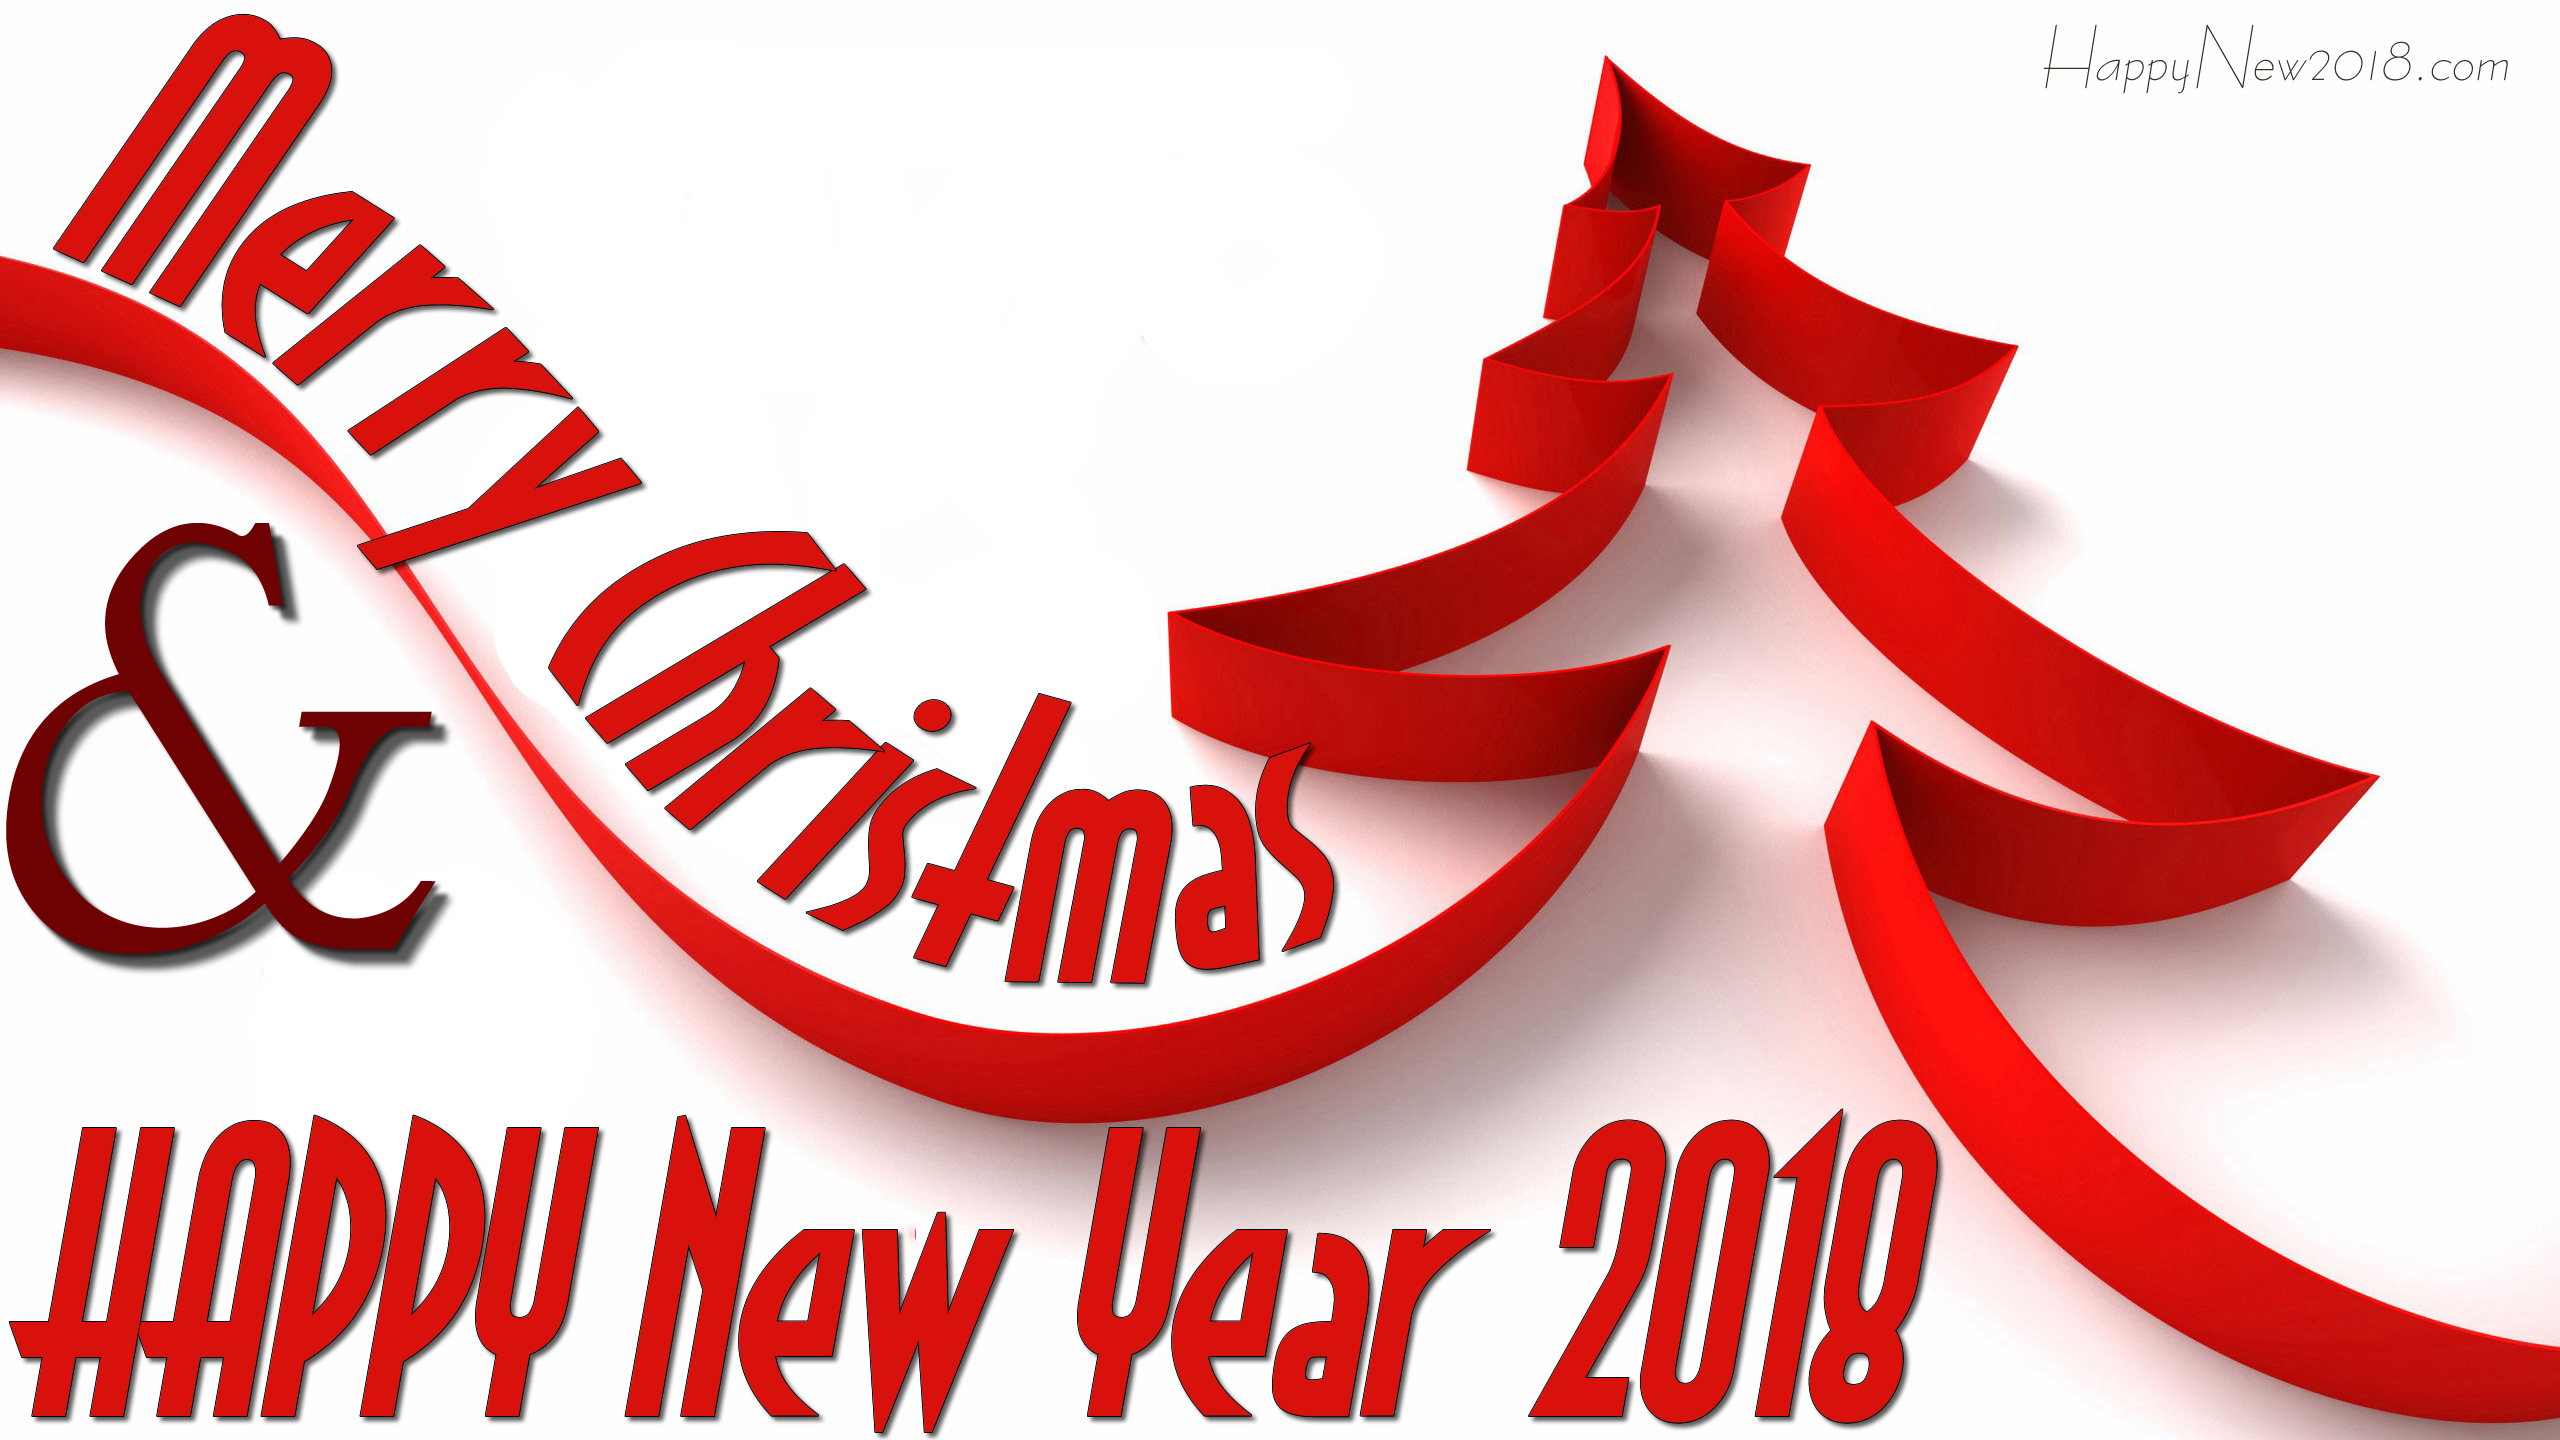 Merry-Christmas-And-Happy-New-Year-2018